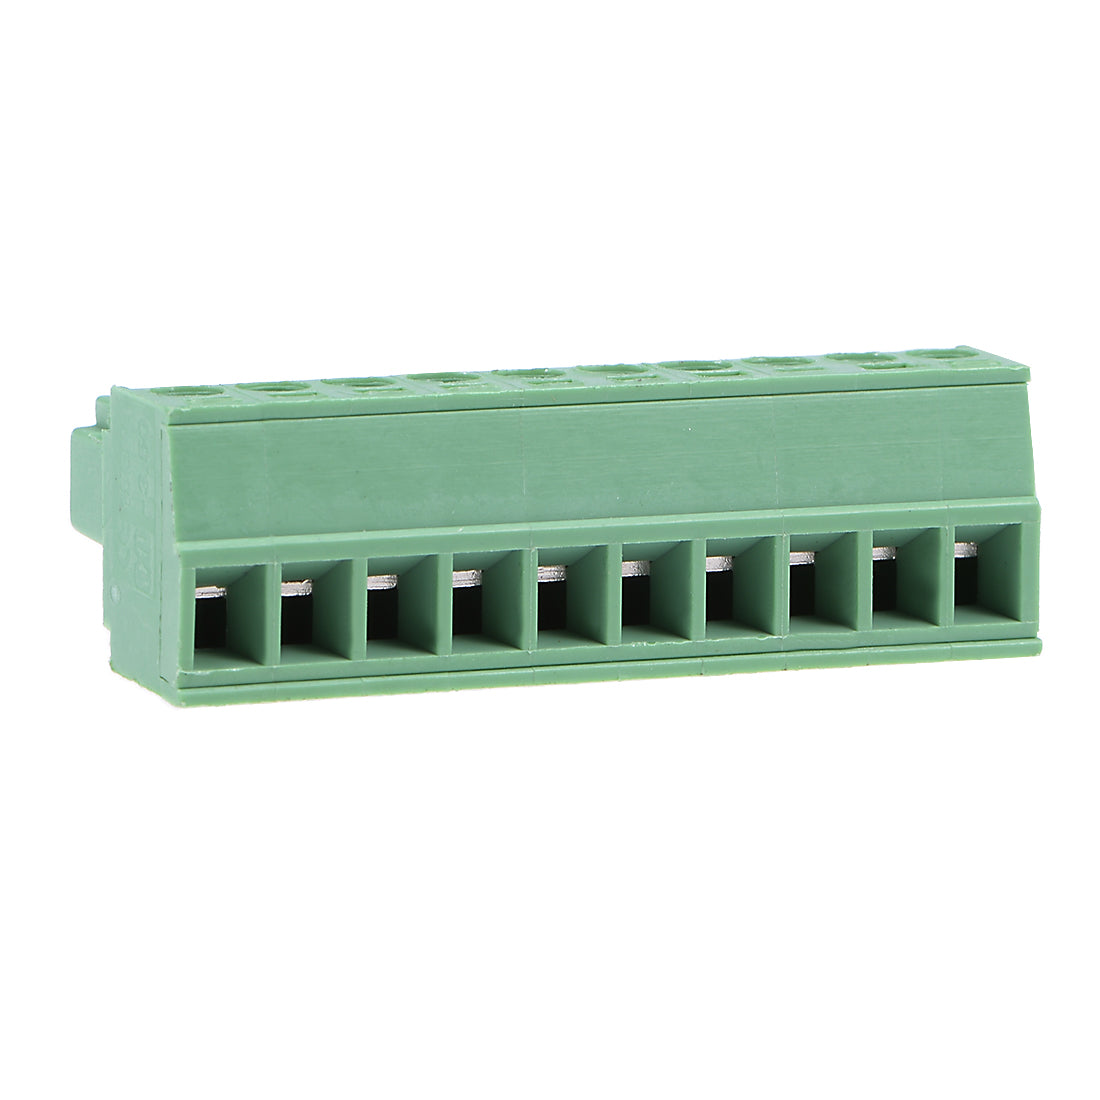 uxcell Uxcell 5Pcs AC300V 8A 3.5mm Pitch 10P Needle Seat Insert-In PCB Terminal Block green